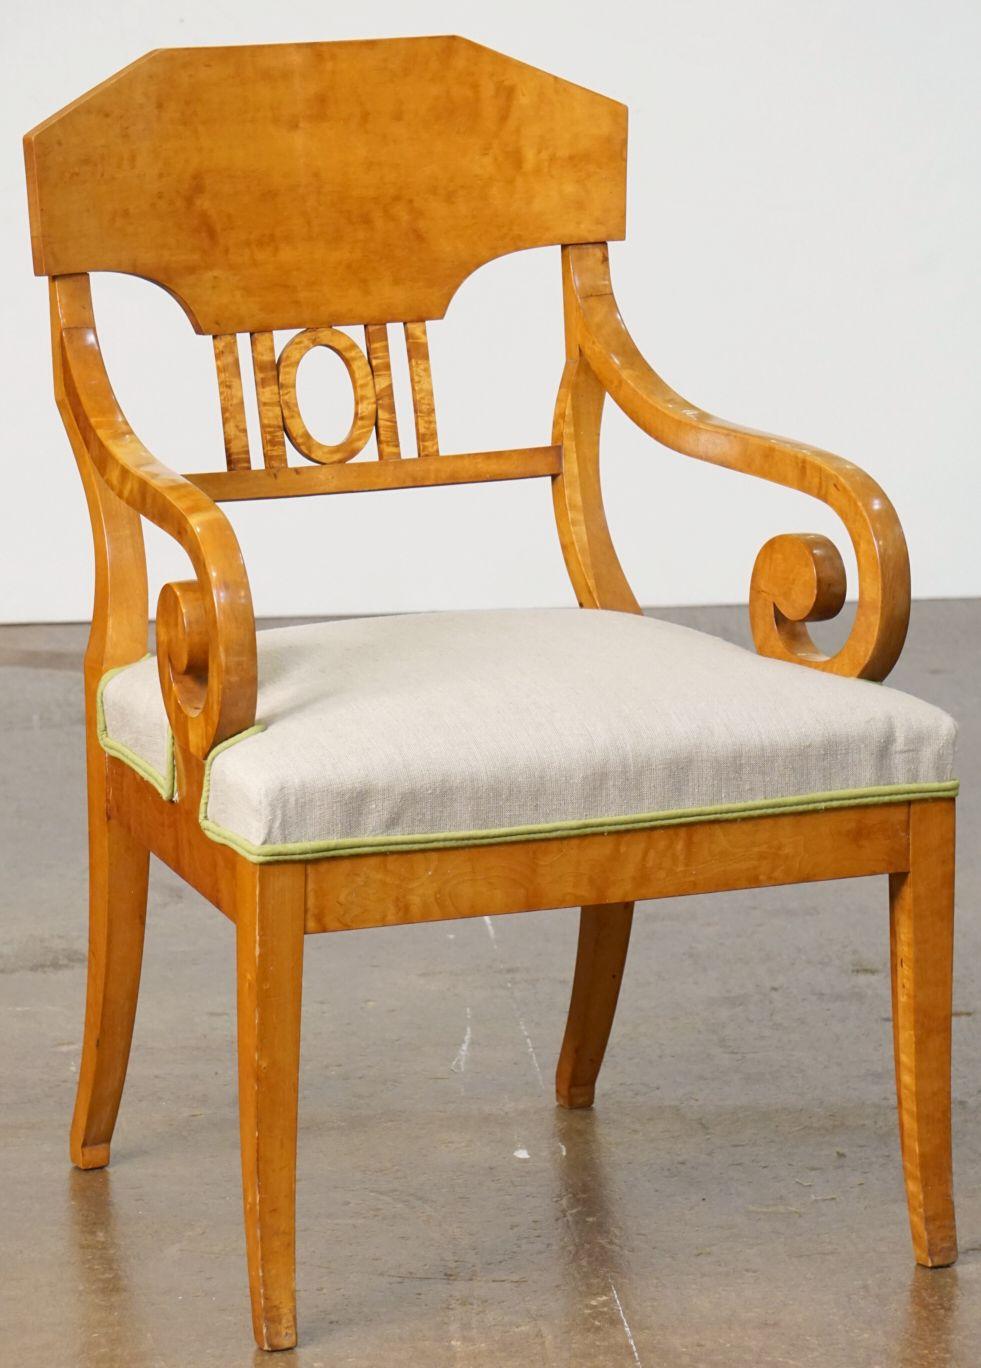 A fine pair of Biedermeier armchairs or desk chairs of beautifully patinated satinwood, from Sweden circa 1840 - each chair featuring an elegantly shaped back and scroll arms, with a comfortable recently reupholstered seat in a neutral linen with